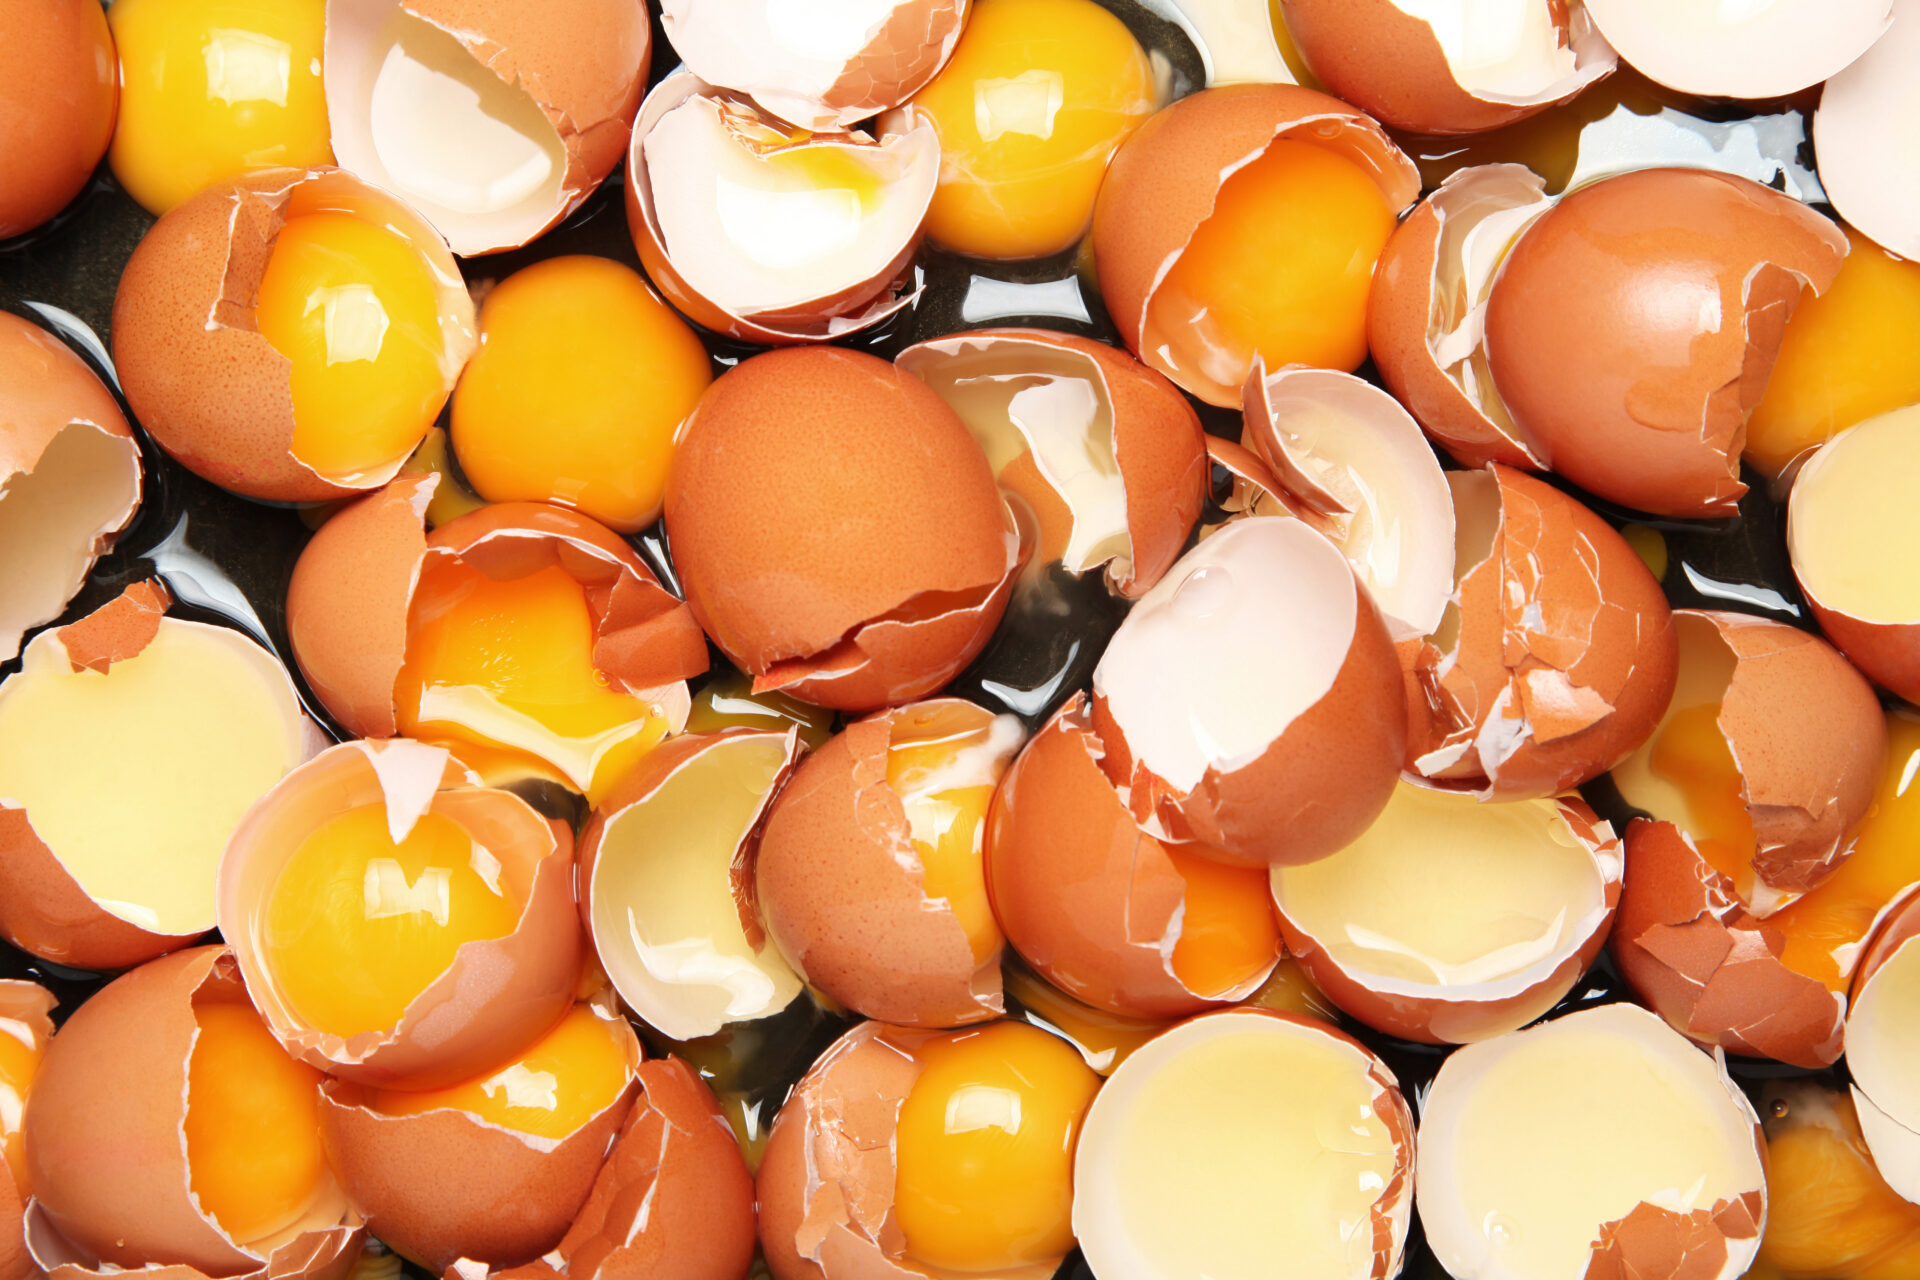 Don’t Fear the Price of Eggs – 5 Egg Substitutes You Probably Already Have